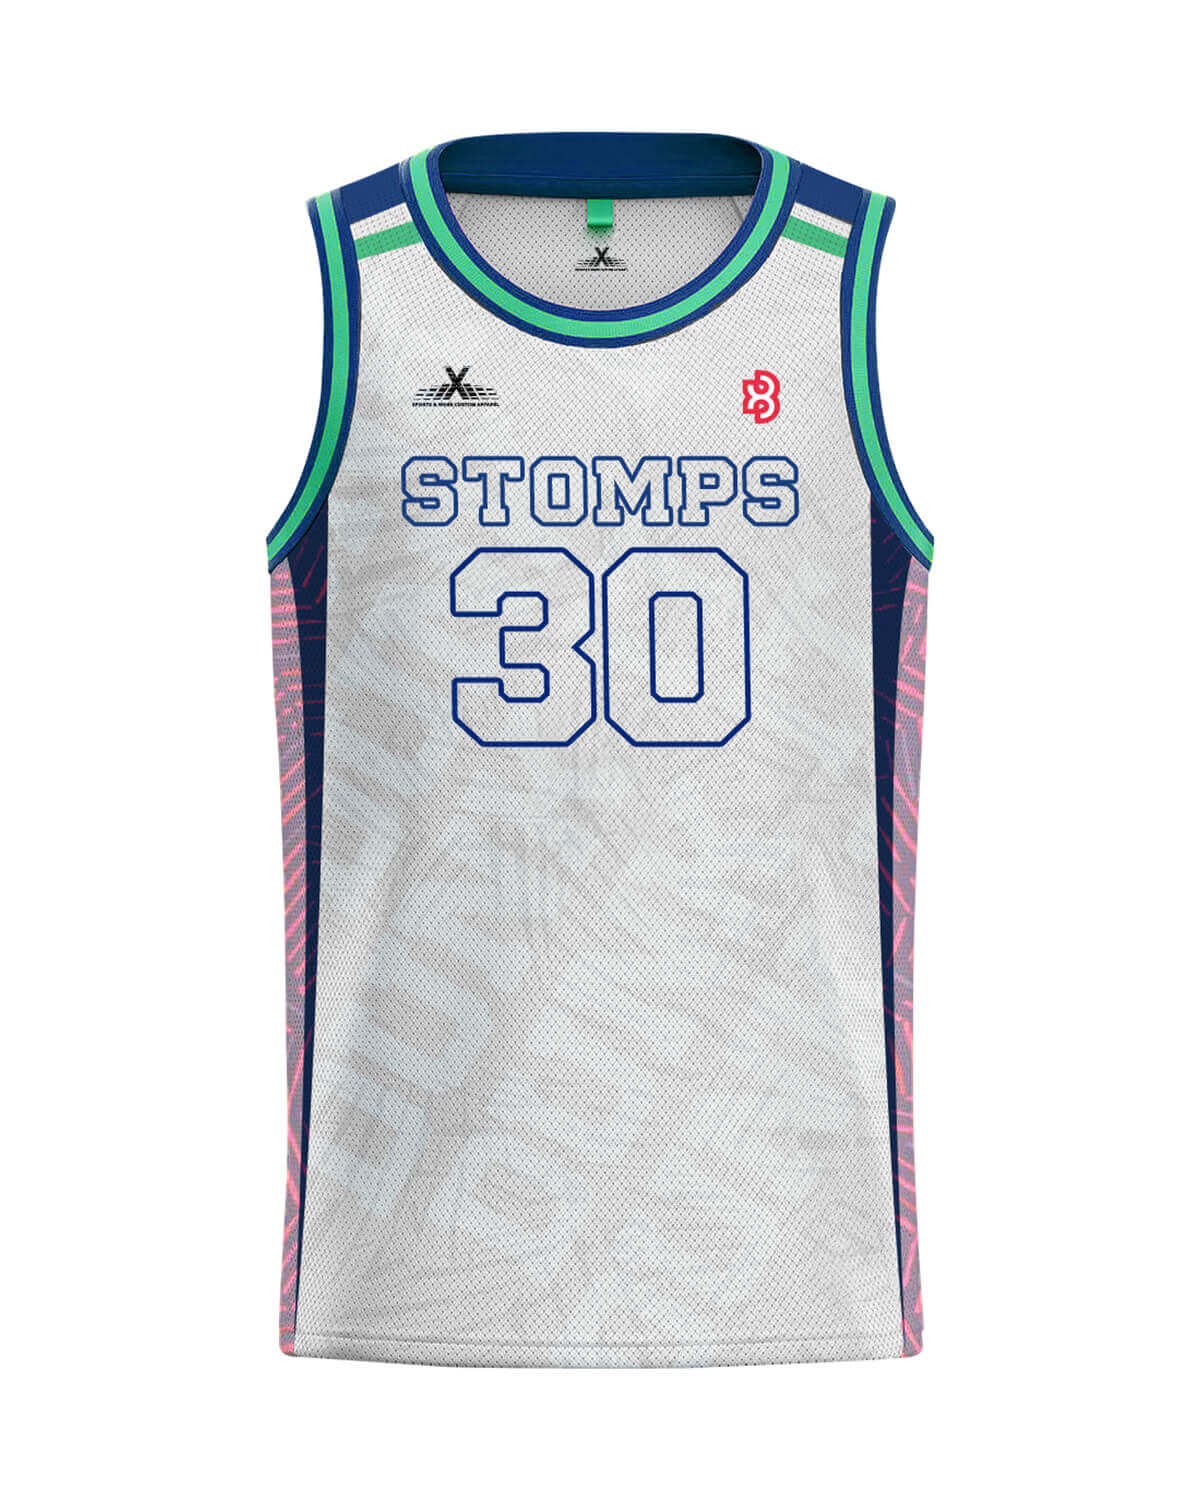 Custom Team Basketball jerseys and shorts - Make Your OWN Jersey